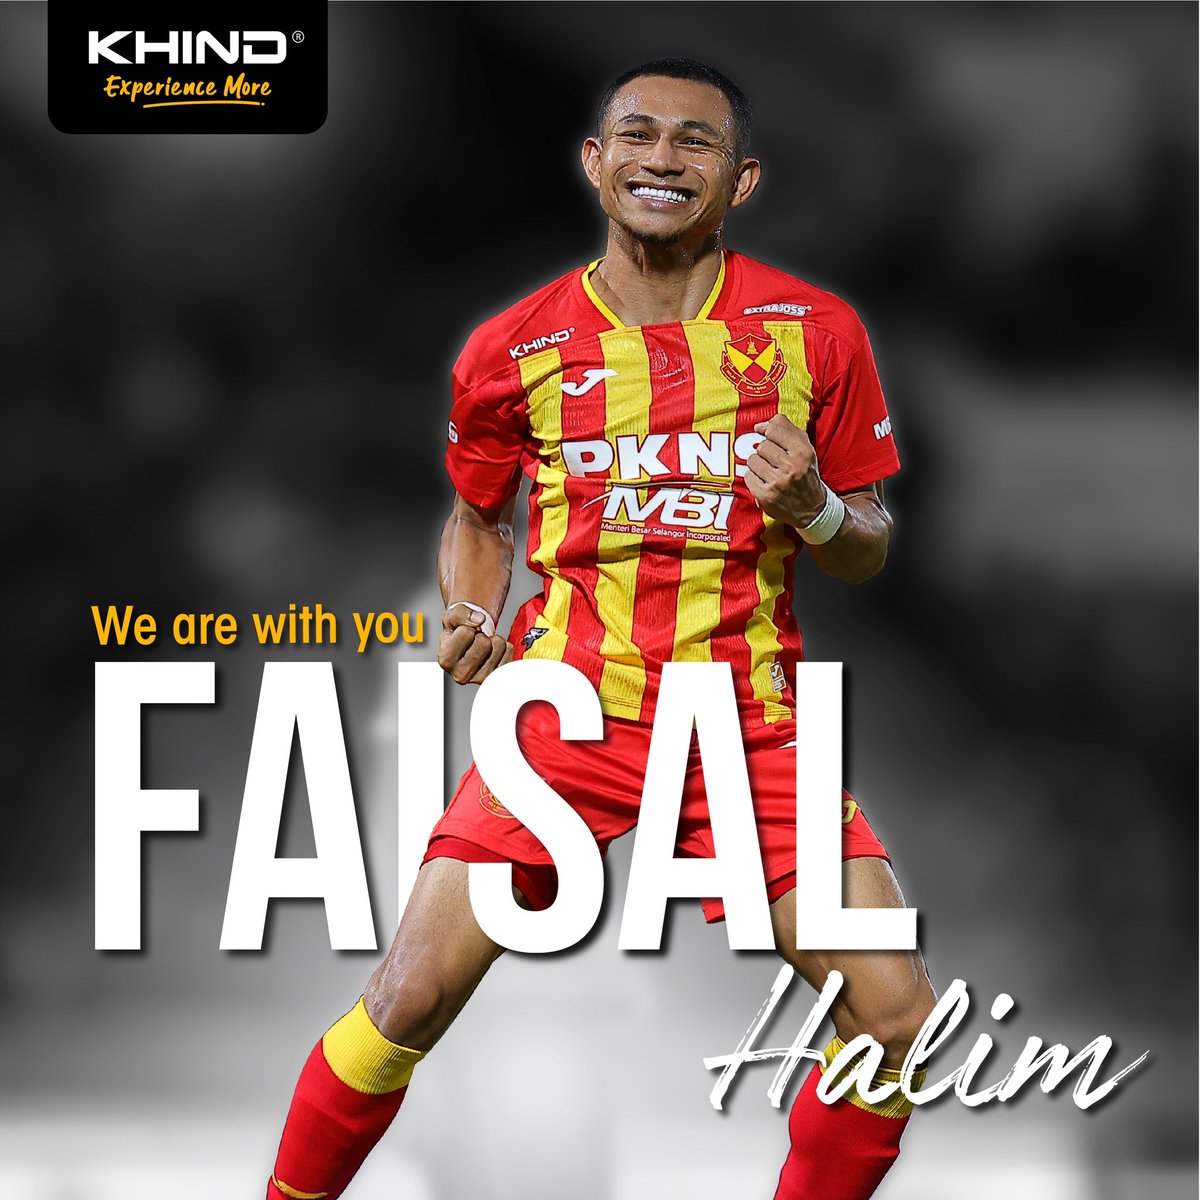 KHIND stands in solidarity with Faisal Halim, our beloved Selangor FC player and national hero. We wish him a swift recovery and a triumphant return to the field! 

Stay strong, Mickey! 💪🏻We are all with you.

#StandWithFaisalHalim
#StopTheViolence 
#NoViolenceInSports